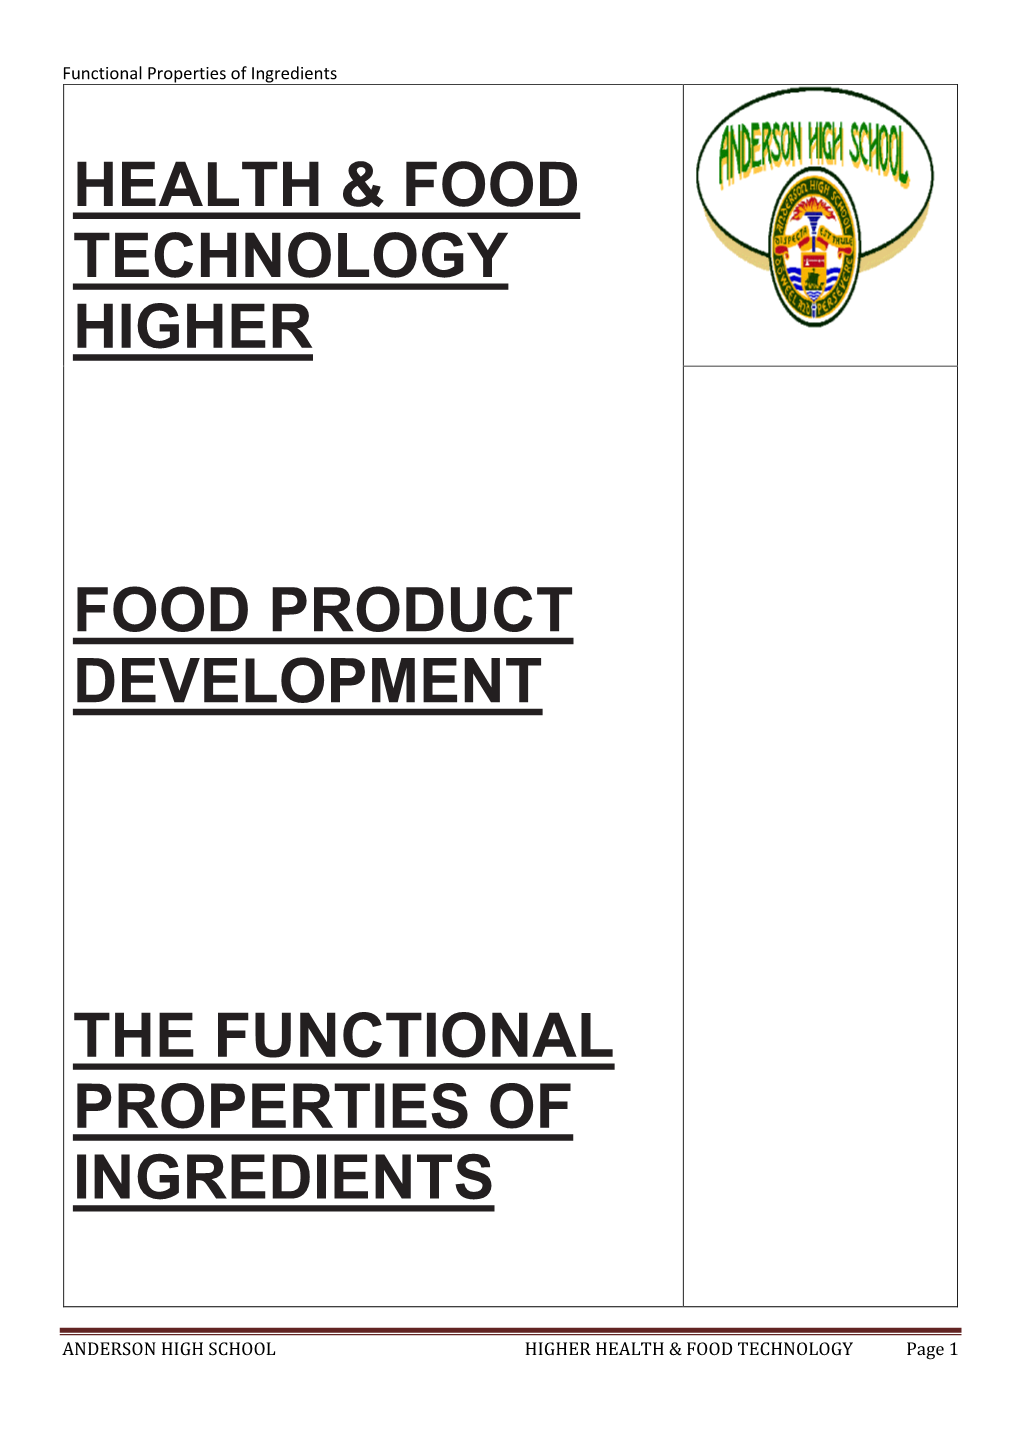 Health & Food Technology Higher Food Product Development the Functional Properties of Ingredients